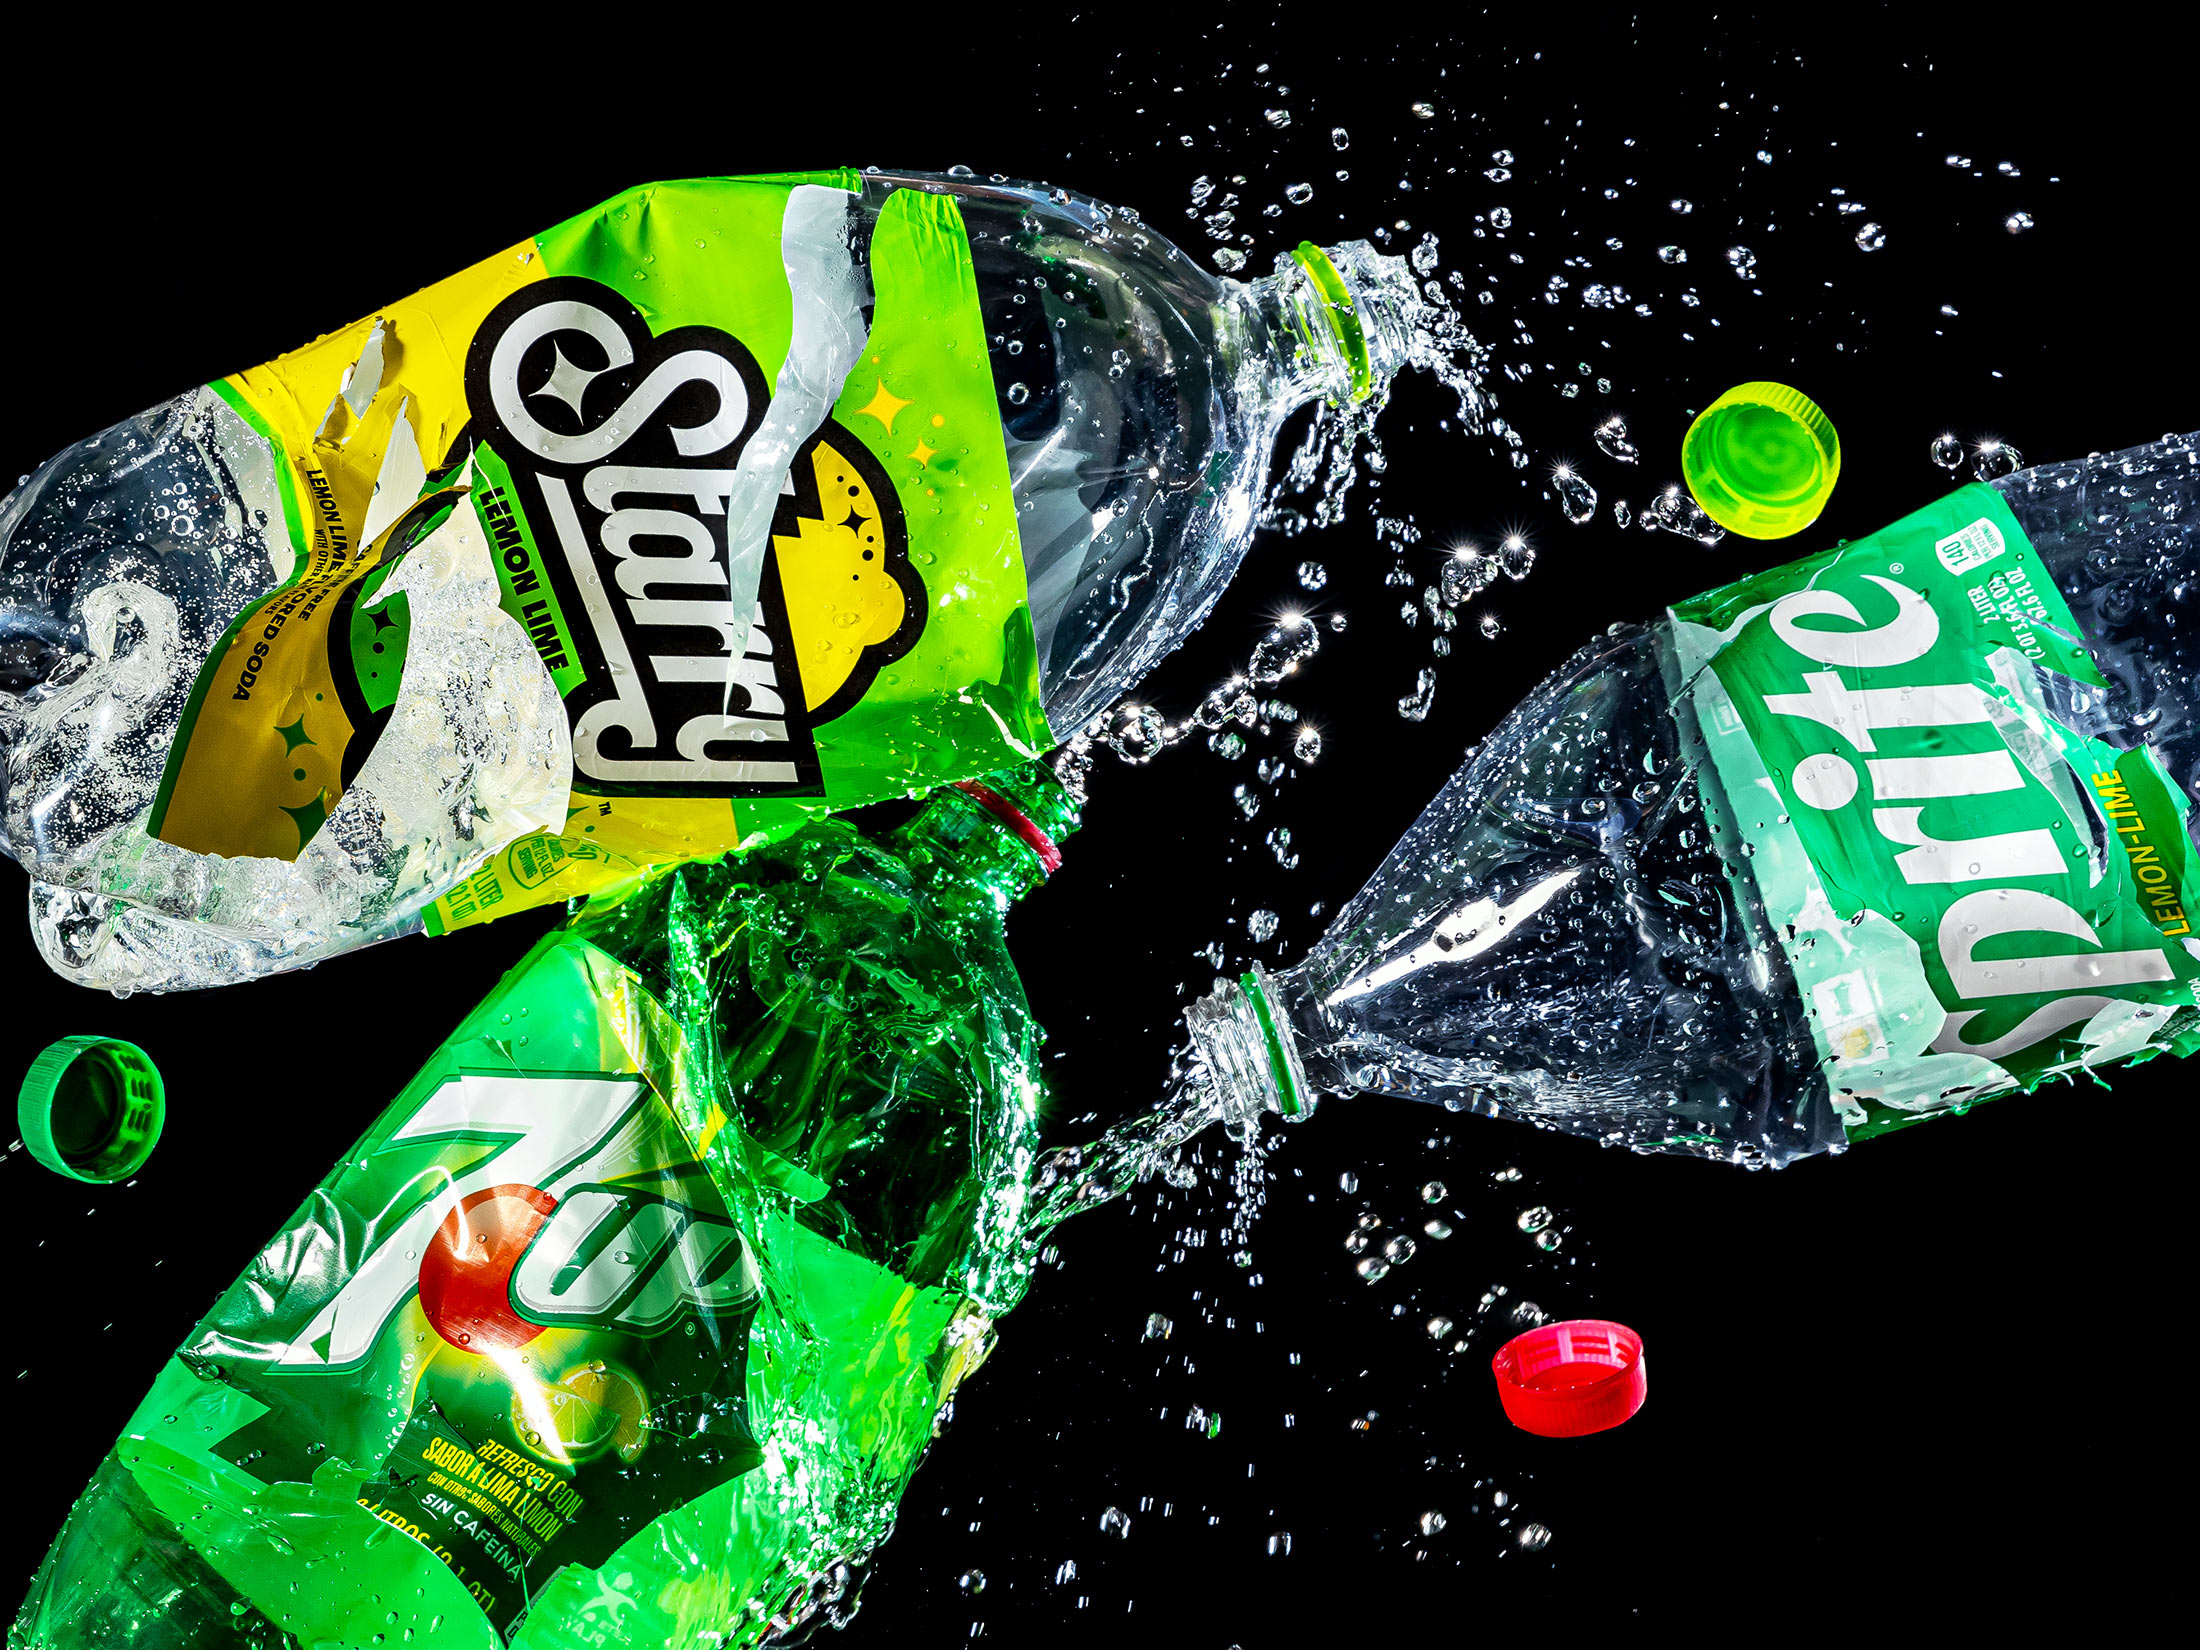 Pepsi's Starry Aims to Steal Share From Coke's Sprite - Bloomberg